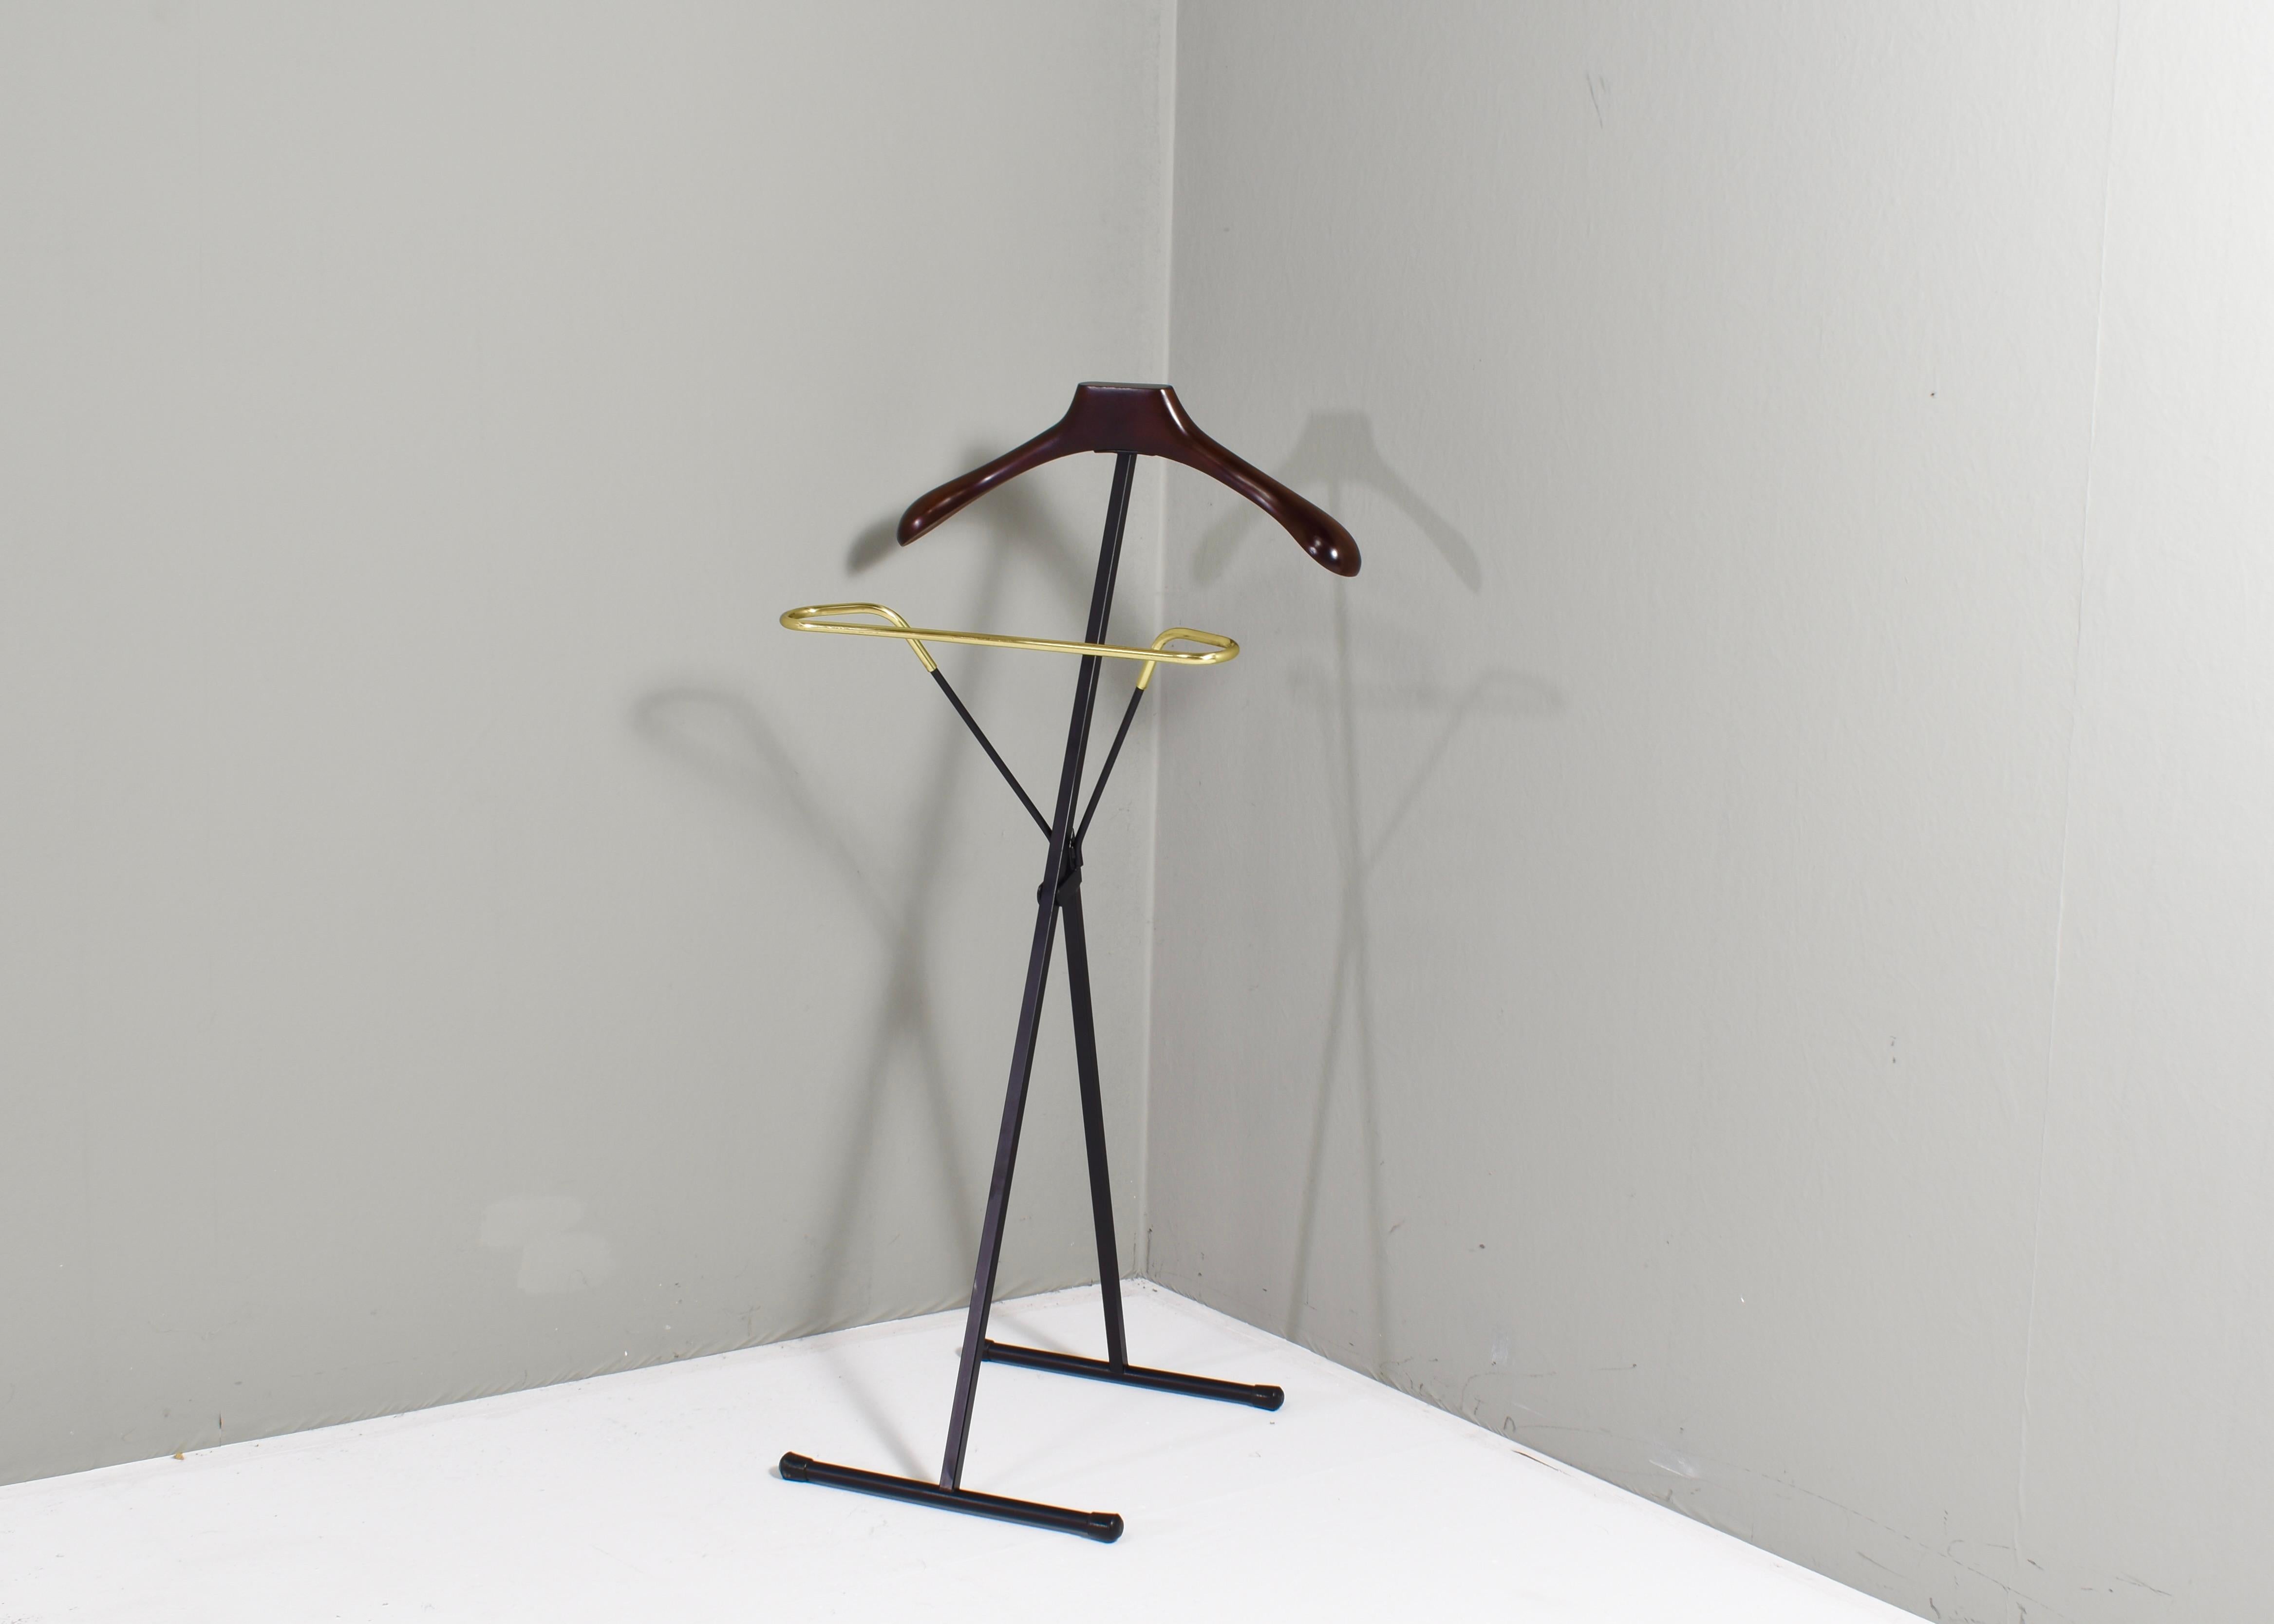 Introducing the Fratelli Reguitti Folding Valet Stand: Elevate Your Wardrobe with Elegance and Practicality.
Charmy vintage valt stand manufactured in Italy in the 1950s by iconic Fratelli Reguitti company.
Folding valet with beech wood hanger and